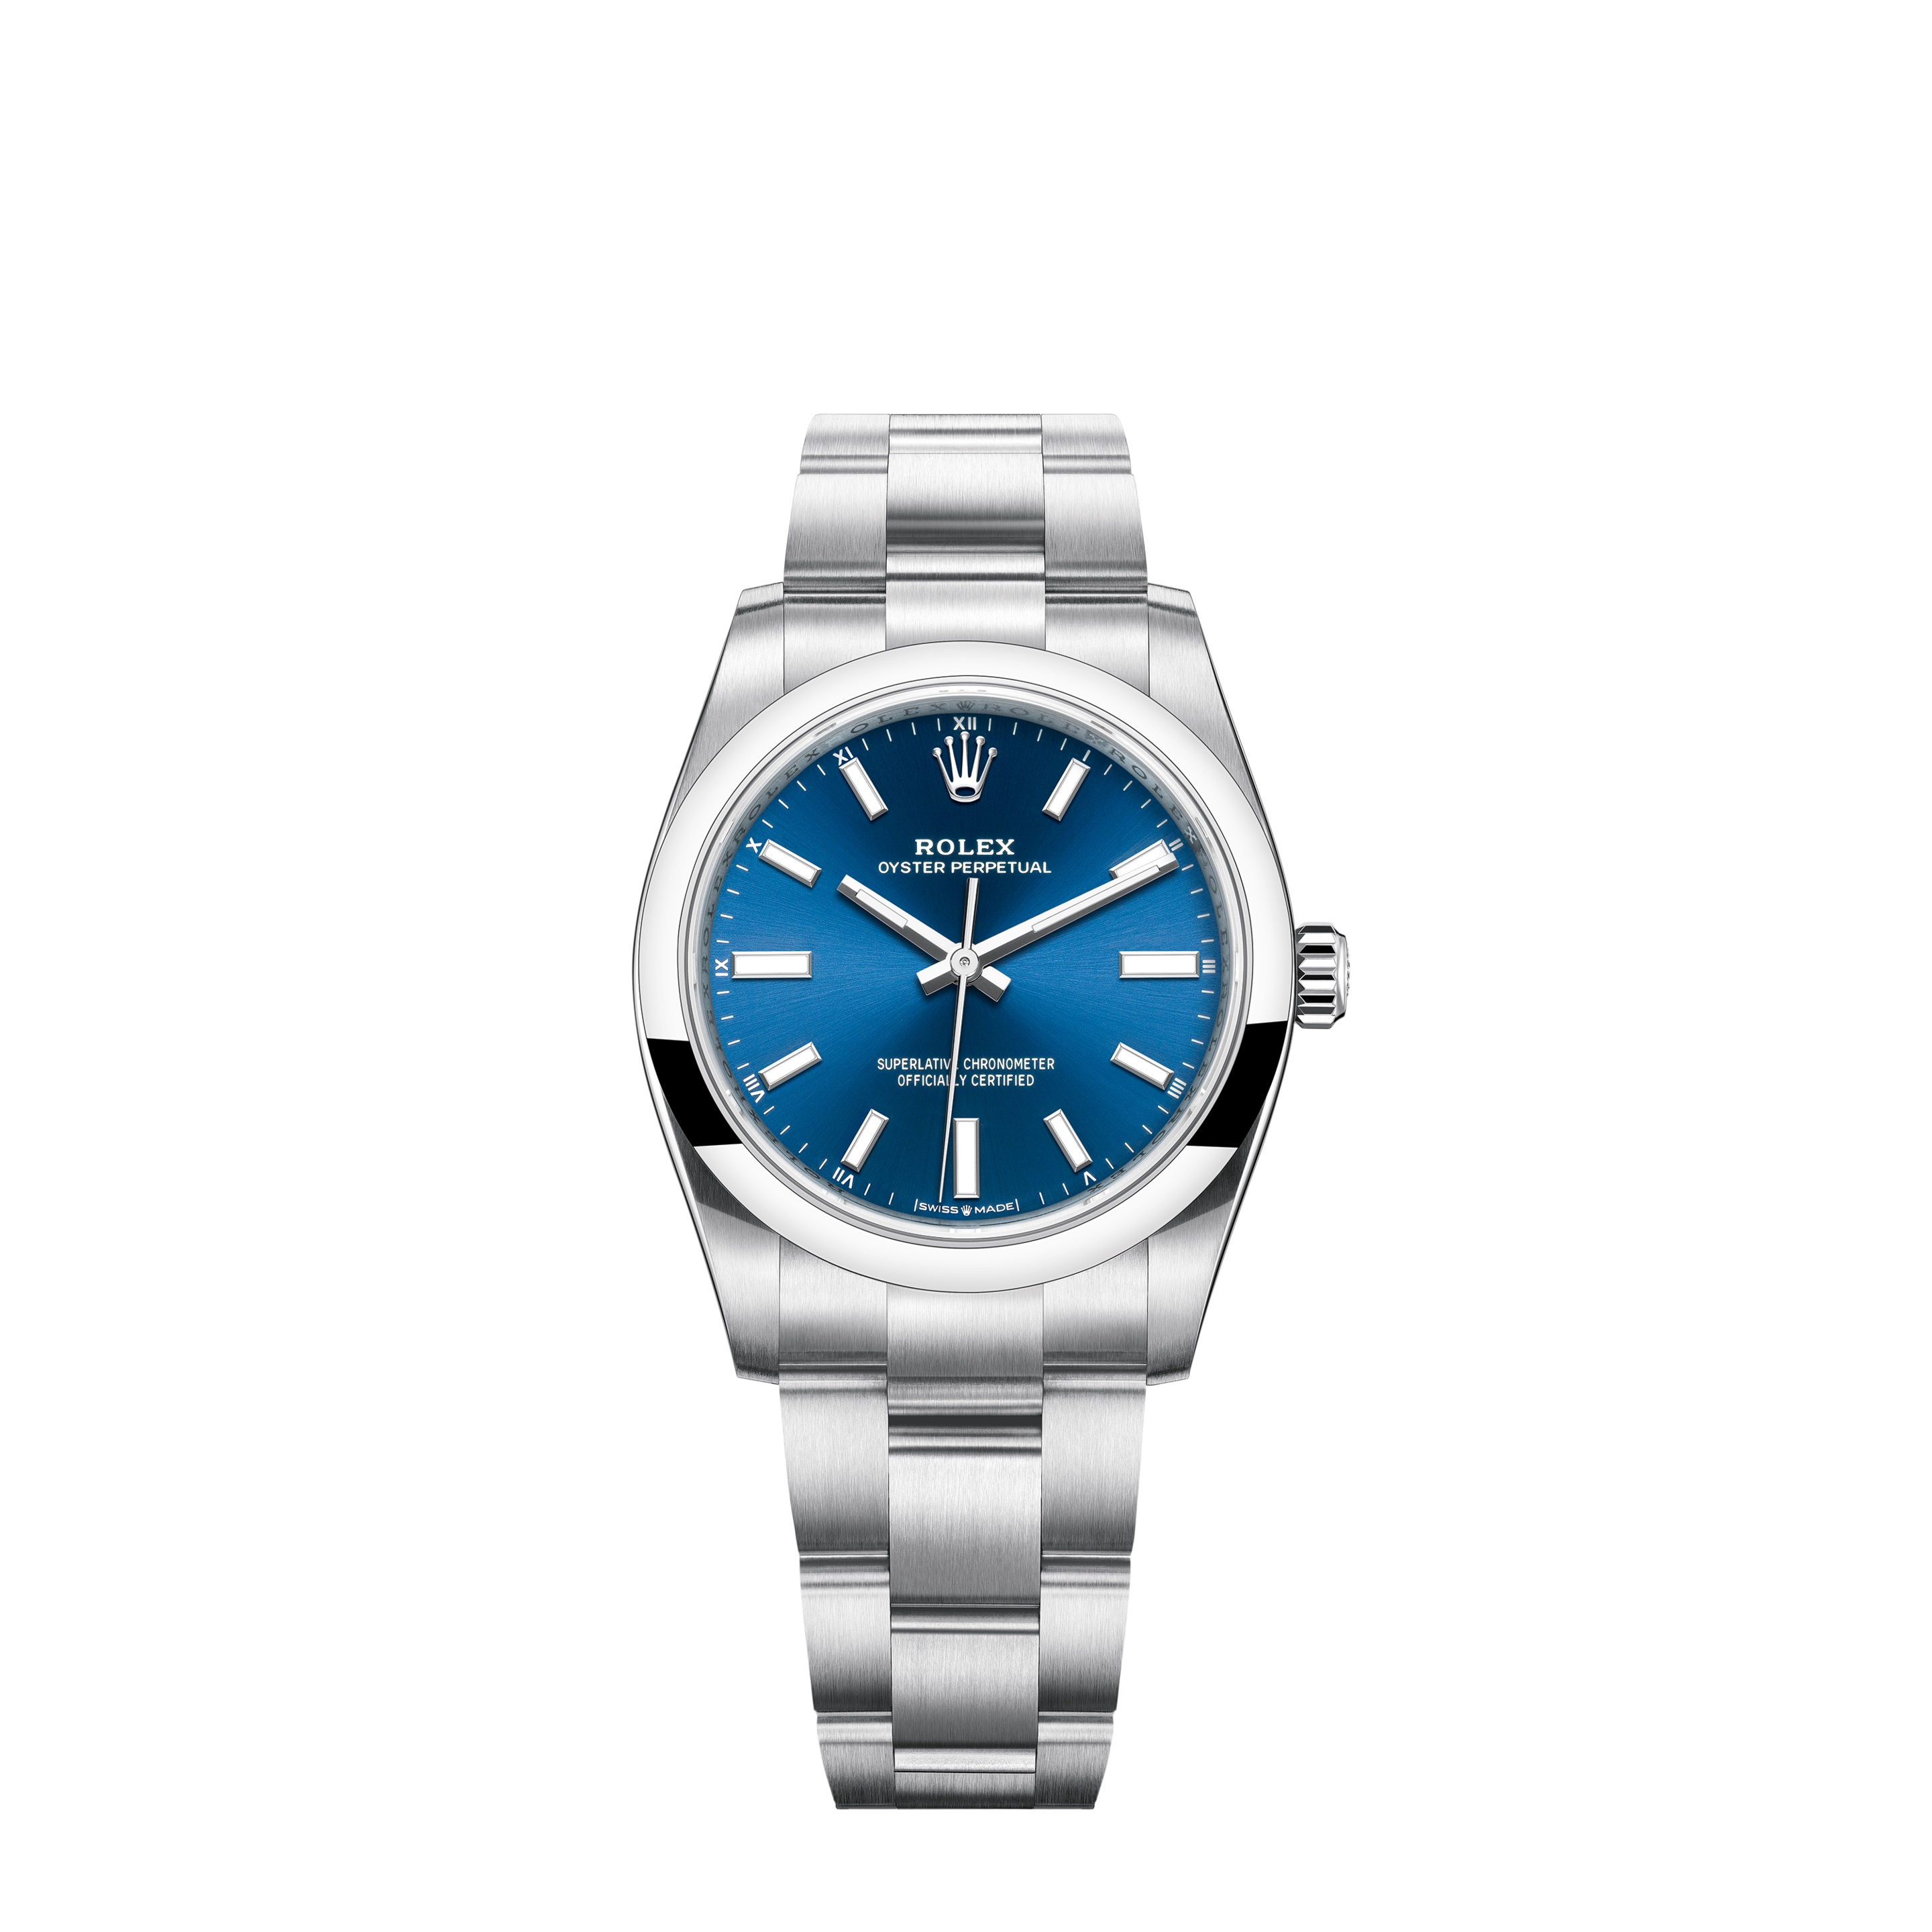 Oyster Perpetual 34 124200 Stainless Steel Watch (Bright Blue)